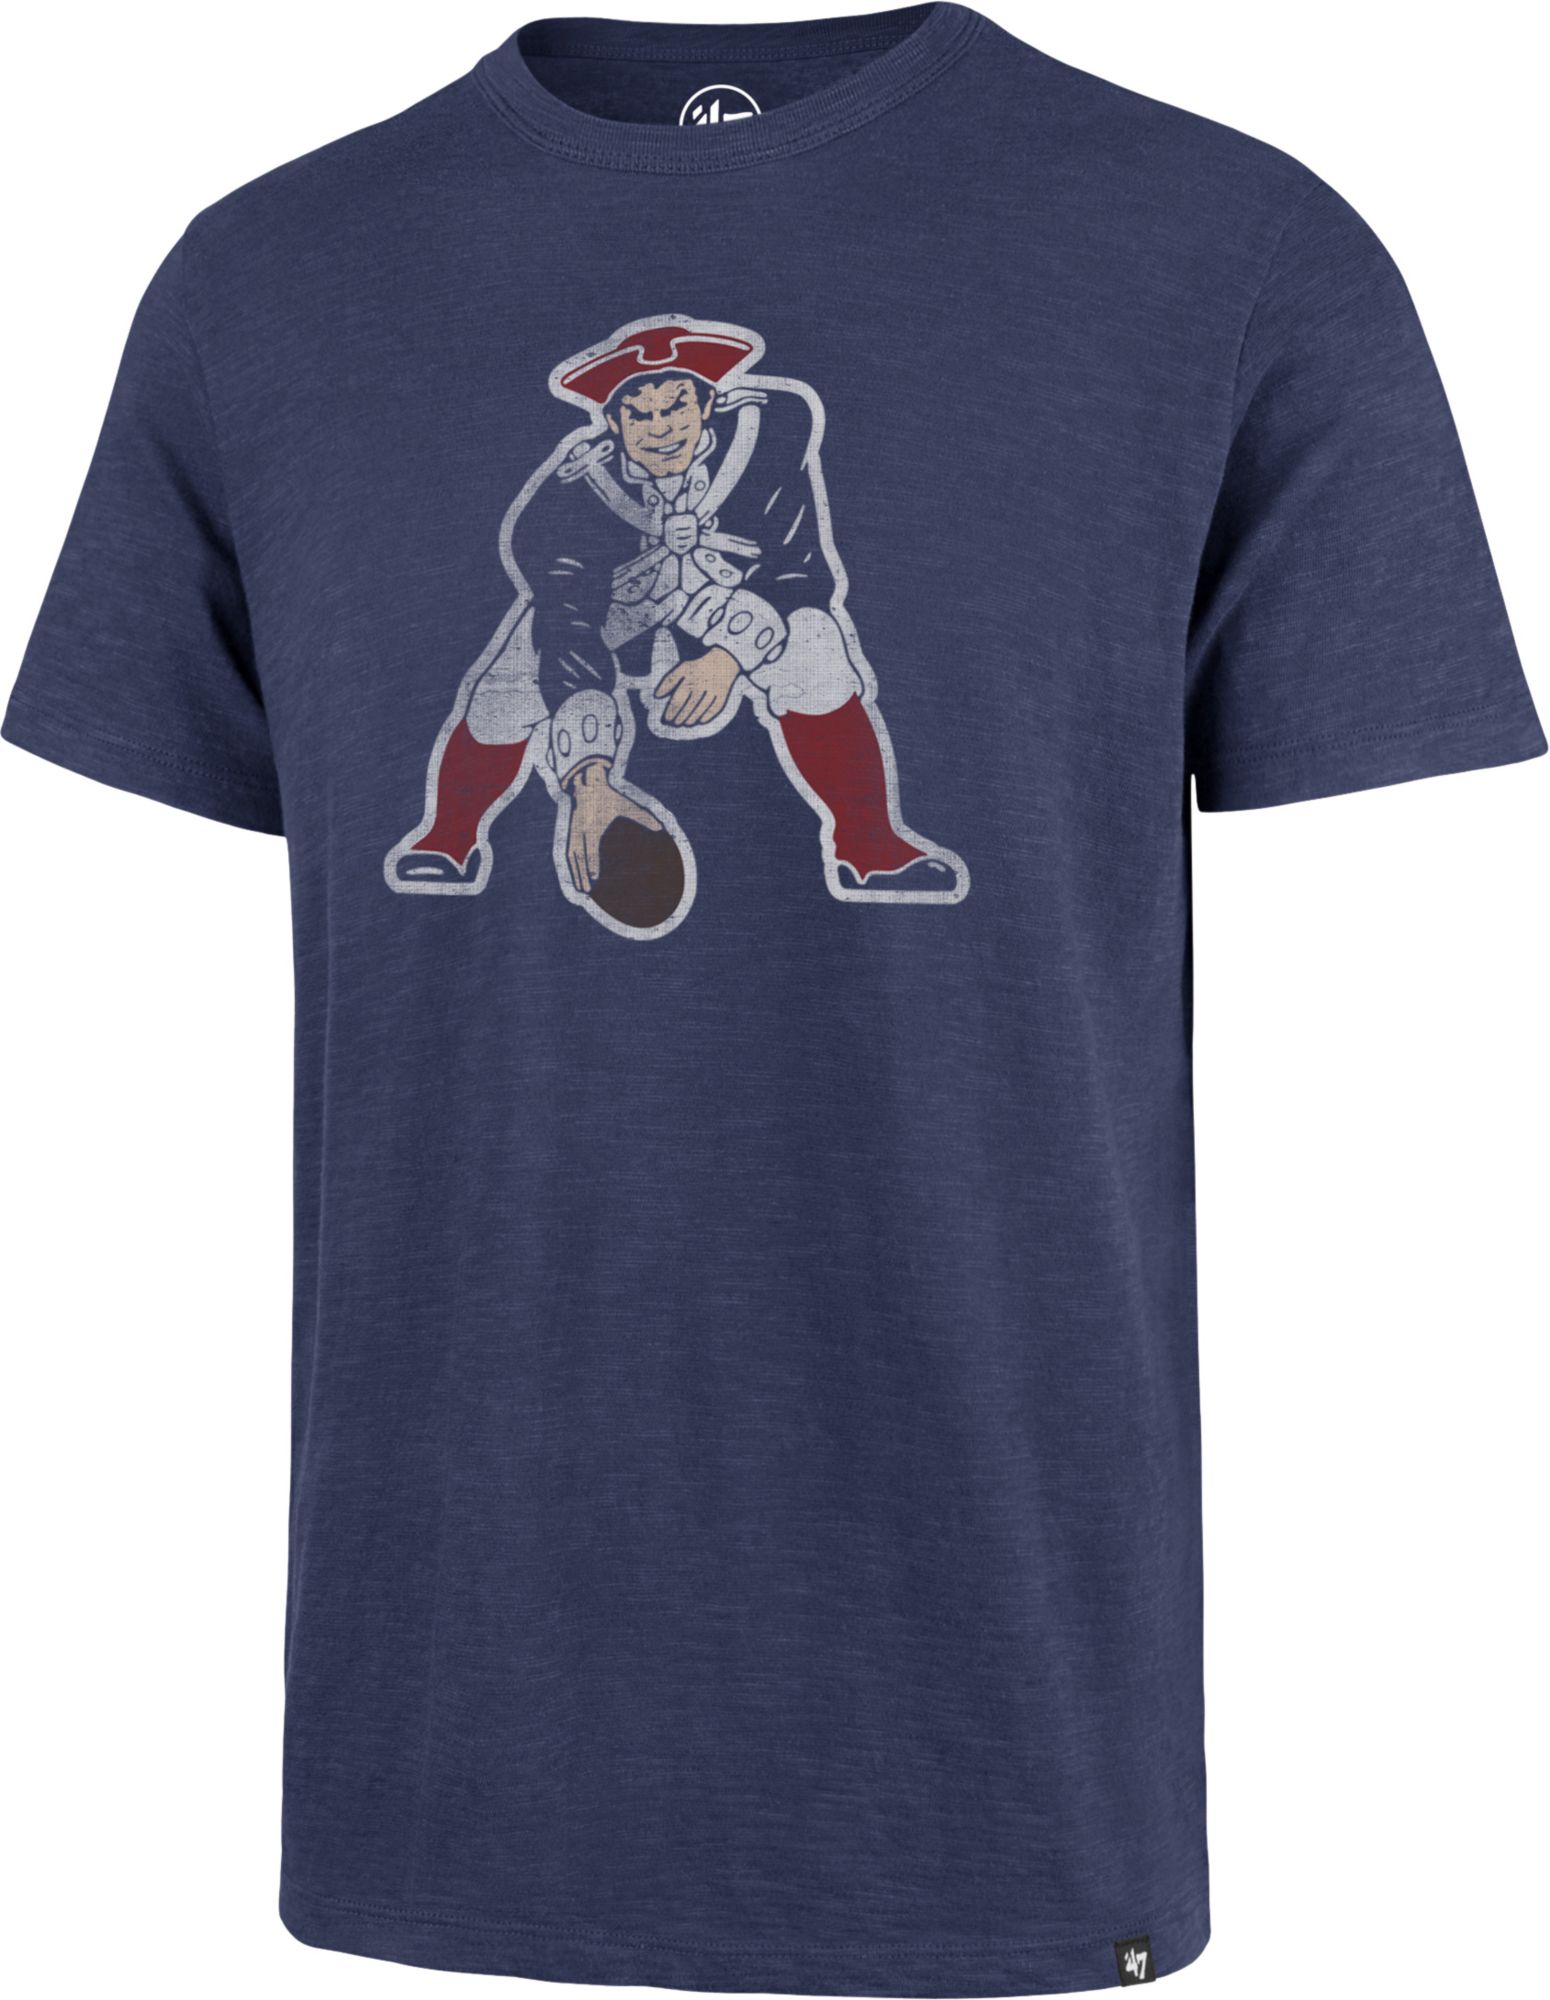 where can i buy new england patriots t shirts